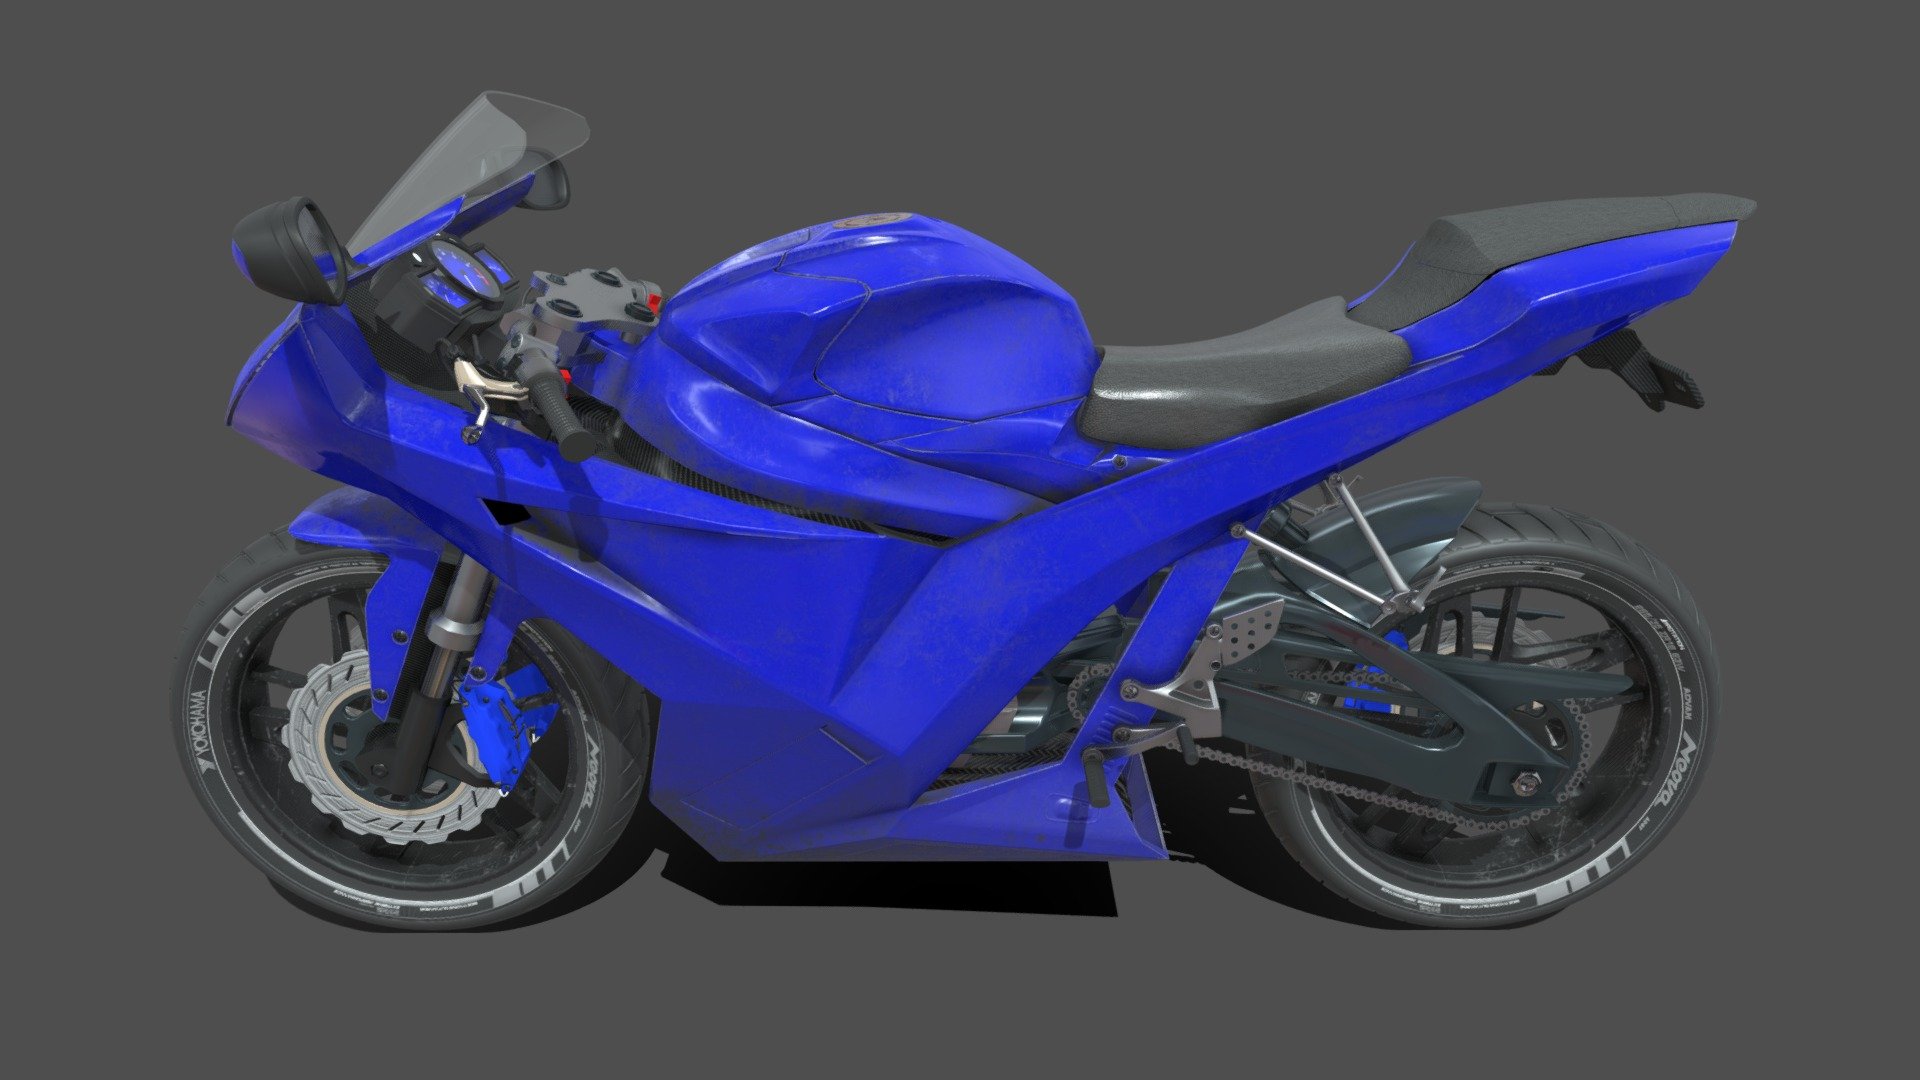 I fully designed this motorcycle as an exercice of design. This model has nothing to do with any design team. The UV are developed, the motorbike is accountable with any game engine or other 3D software. High quality polygonal model, optimized for polygon efficiency.
Details about the project : https://www.behance.net/gallery/99464073/Electric-motorcycle-design

Animation : - Shock absorbers are functional - The bike can turn - The wheels turn, the chain too

Creating a design from scratch takes way more time than reproducing an existing one. This is why prices are a bit higher than some other products. The advantage is that my designs are royalty free, that means you can use it in any support 3d model